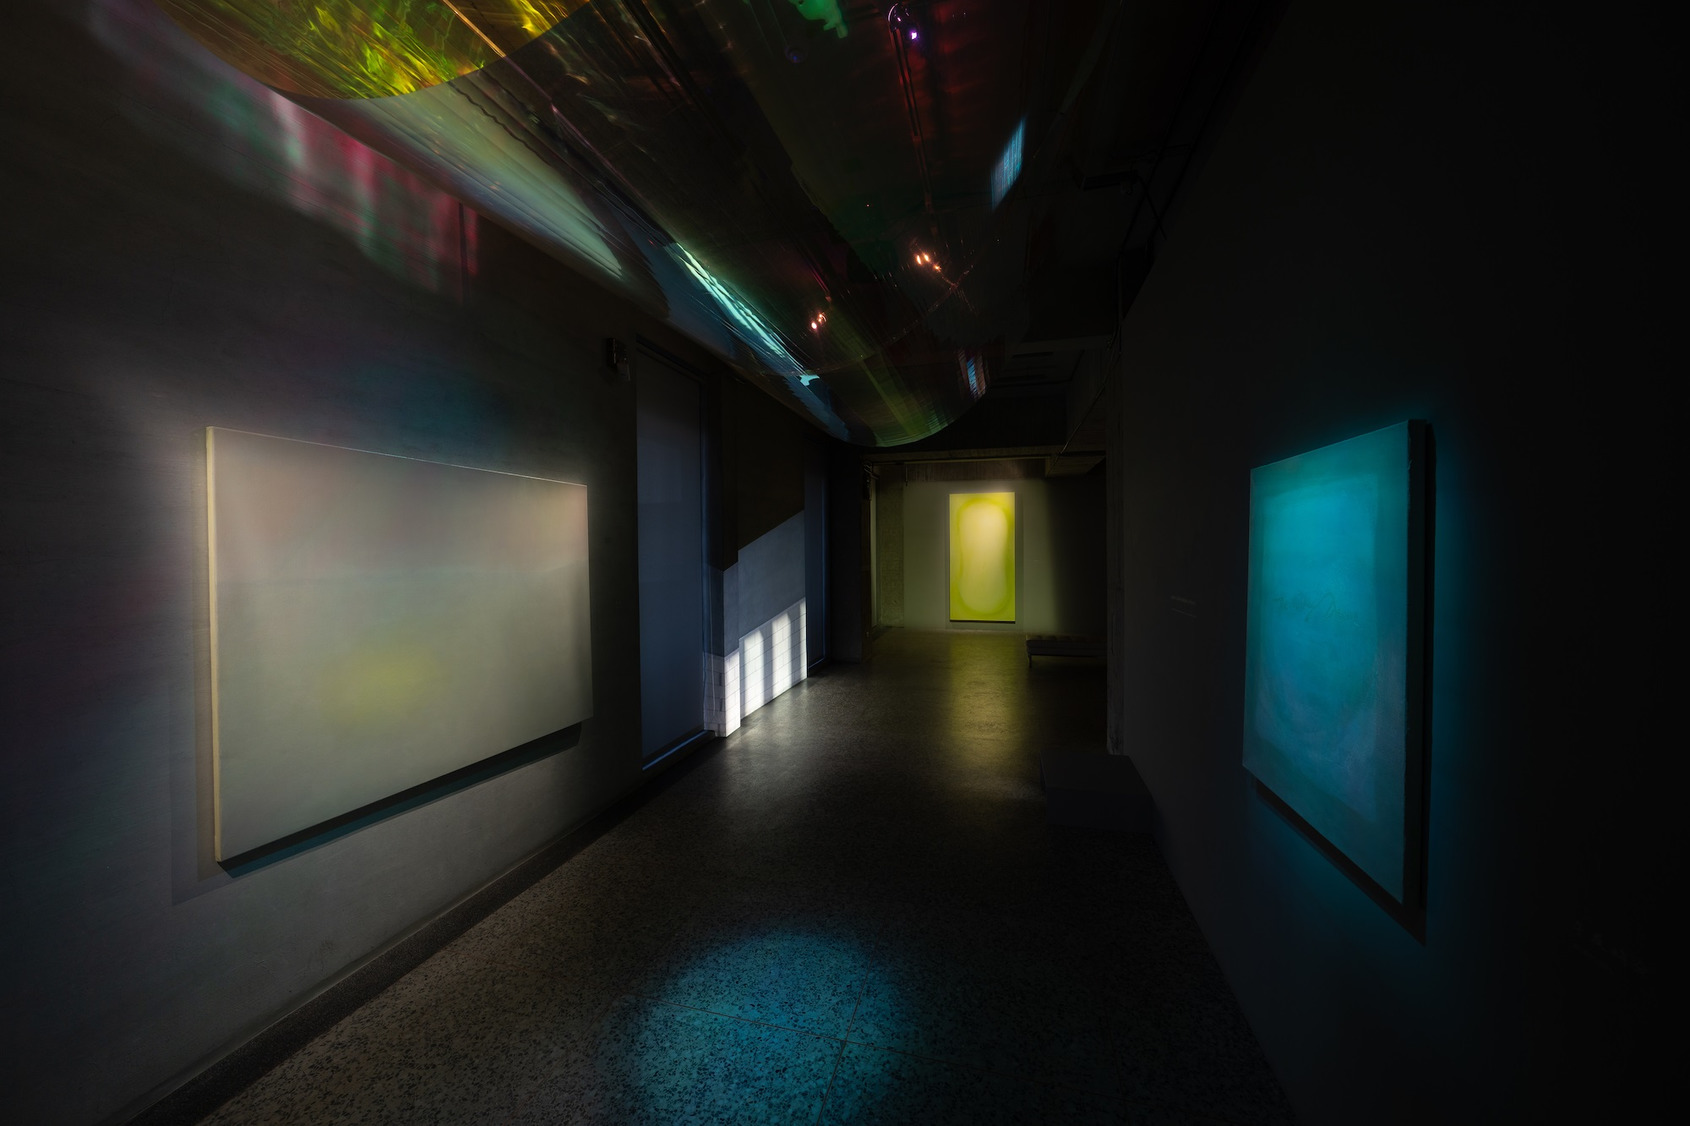  René Liu + George Chen X Yaman Shao. The Silve r Lining Of Midnight…The Place Where There Is No Darkness II. 2019. Multimedia Installation. Mixed Media Installation. 3 min. 31 sec. Exhibition View at ALIEN Art Centre. Photo: ALIEN Art.